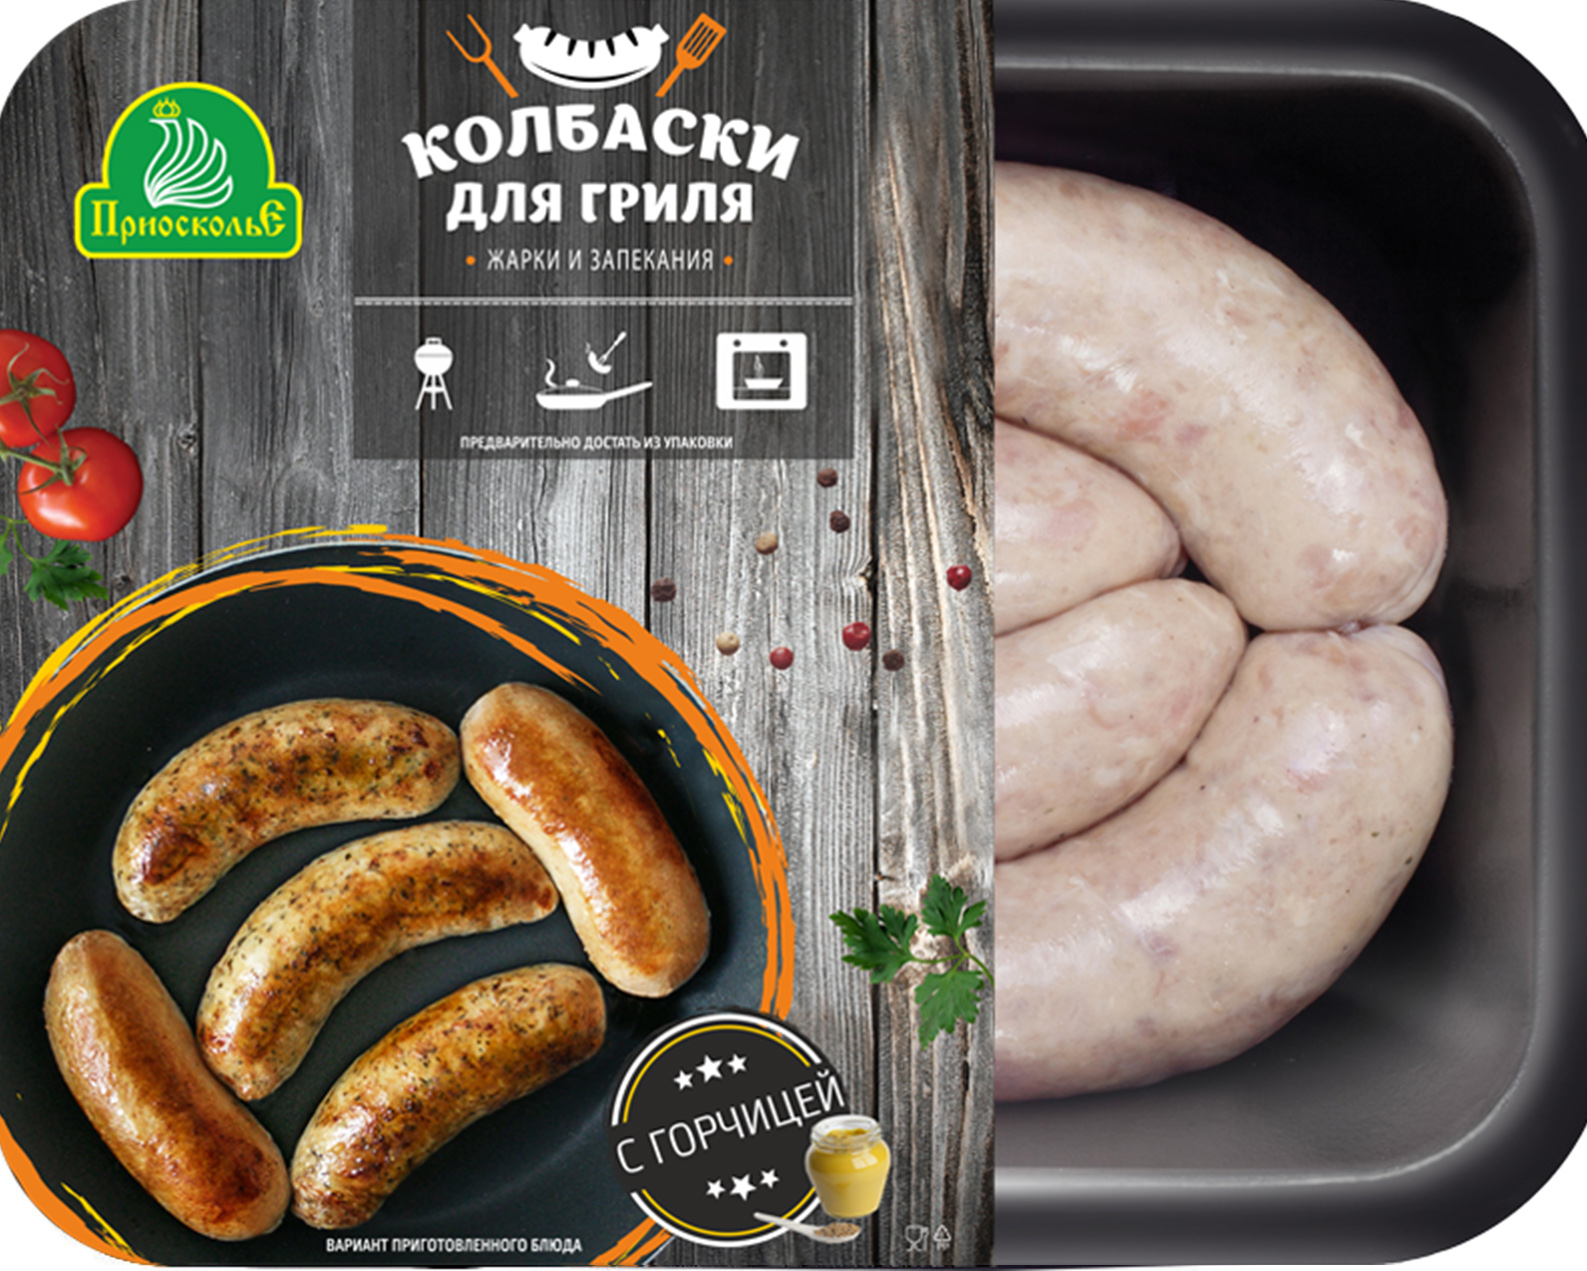 Sausages for grilling "S  gorchitsey"